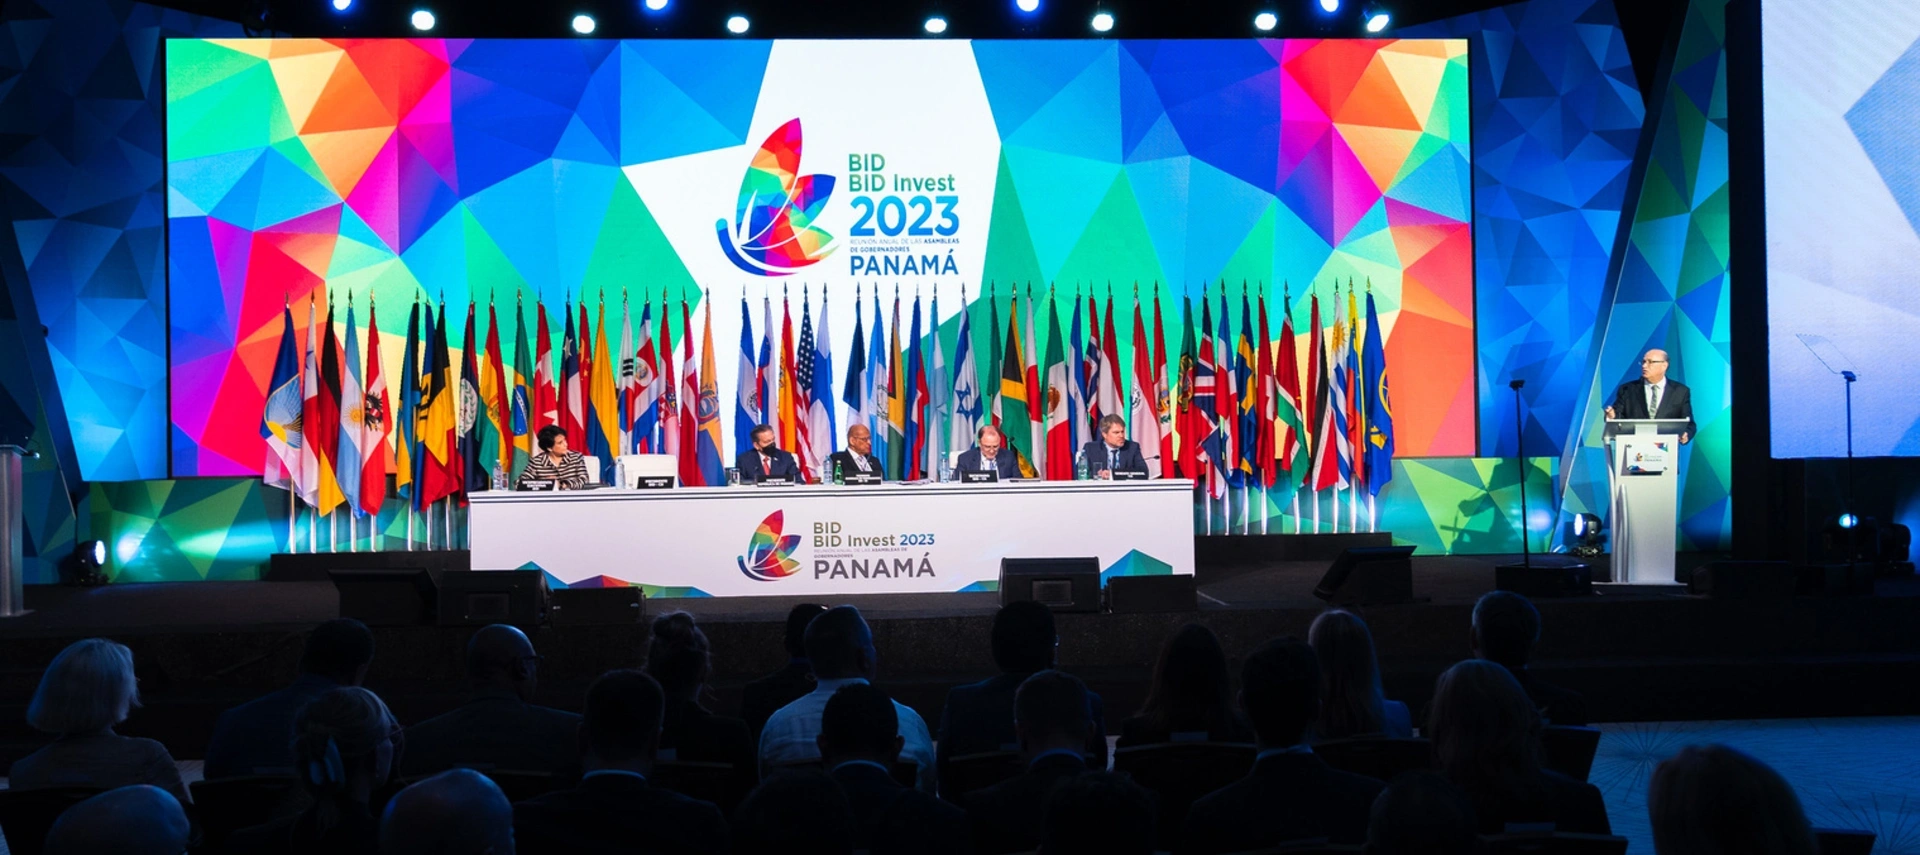 Annual Meeting concludes in Panama